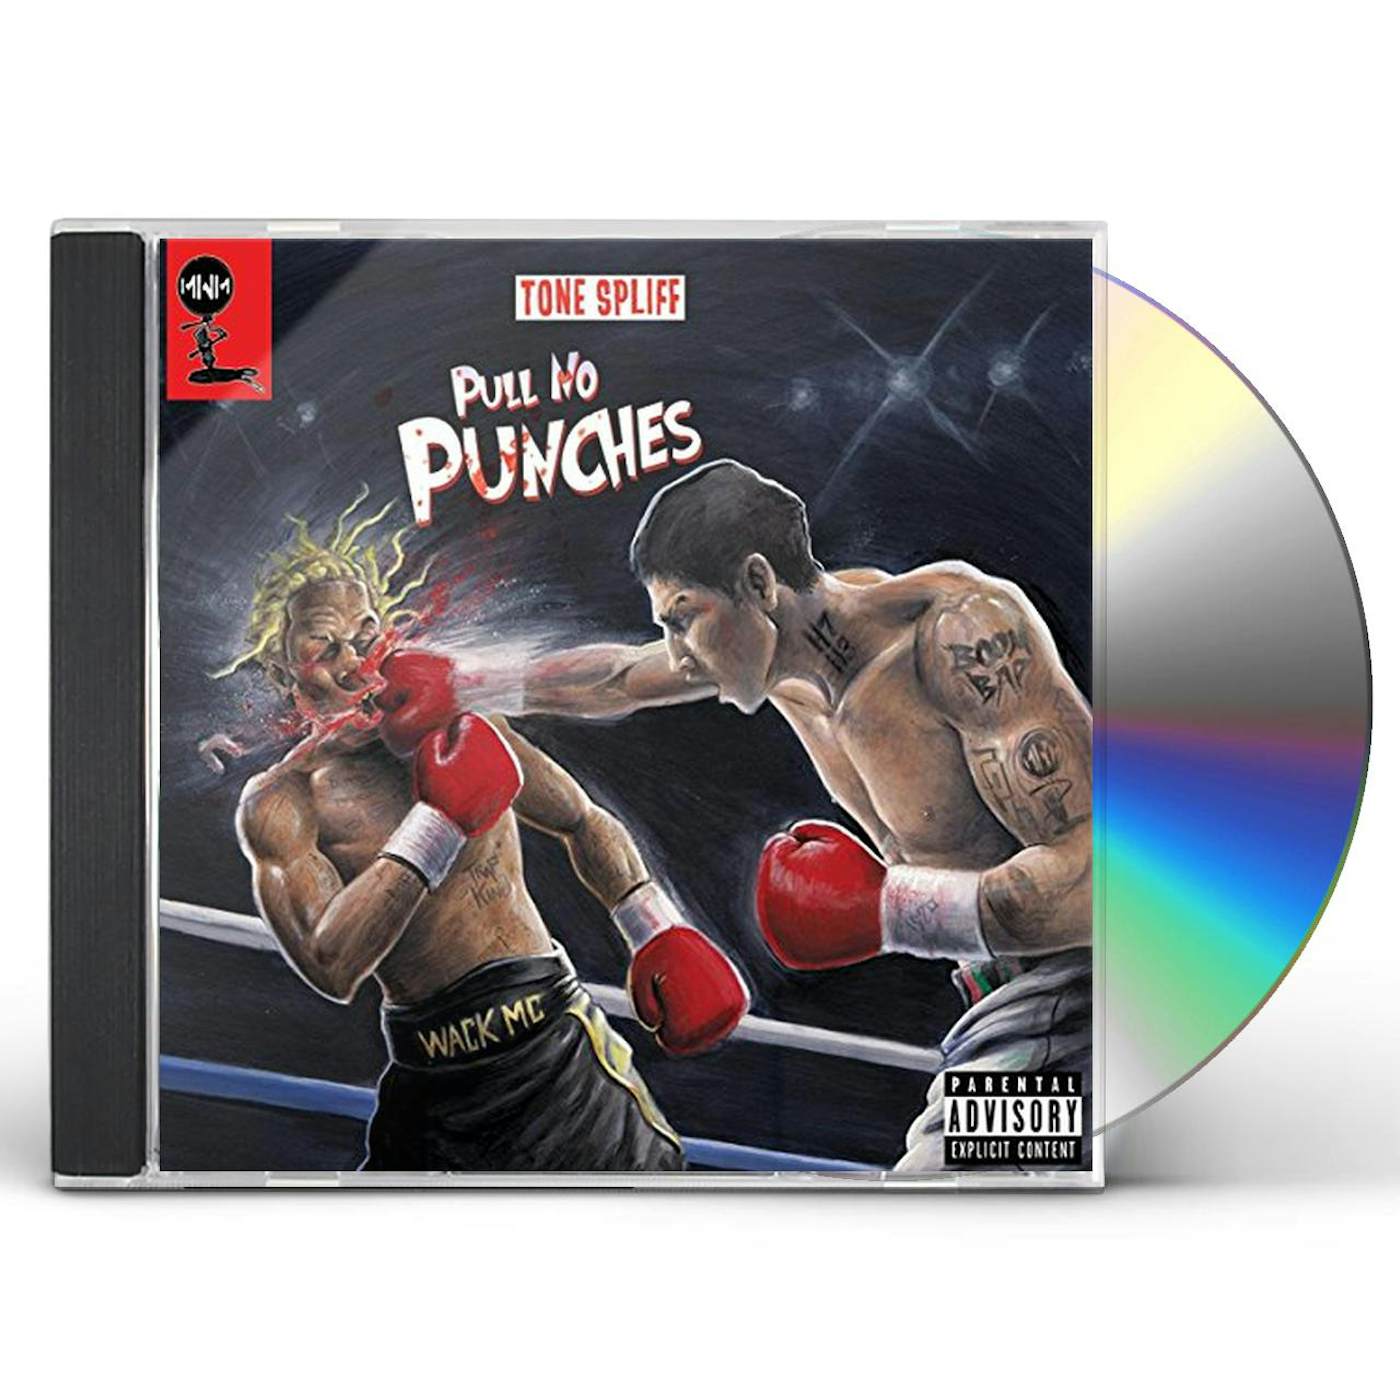 Tone Spliff PULL NO PUNCHES CD